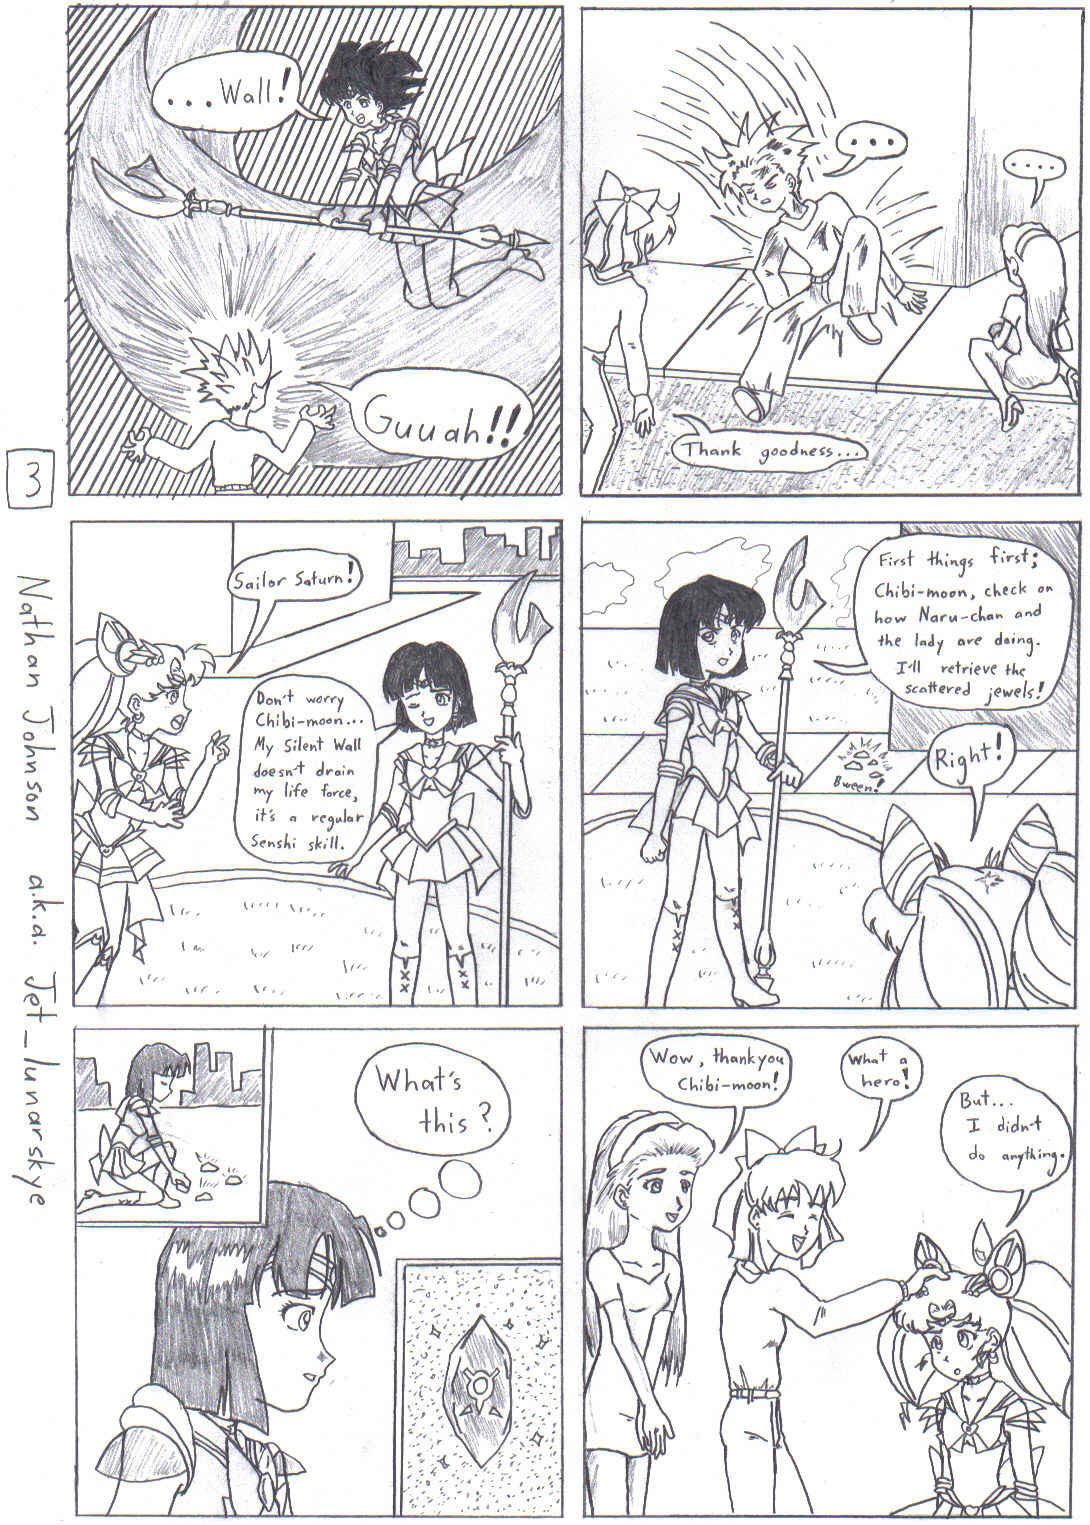 Sailor Moon Stars: The Nightmare Soldier page 3 by Jet_lunarskye